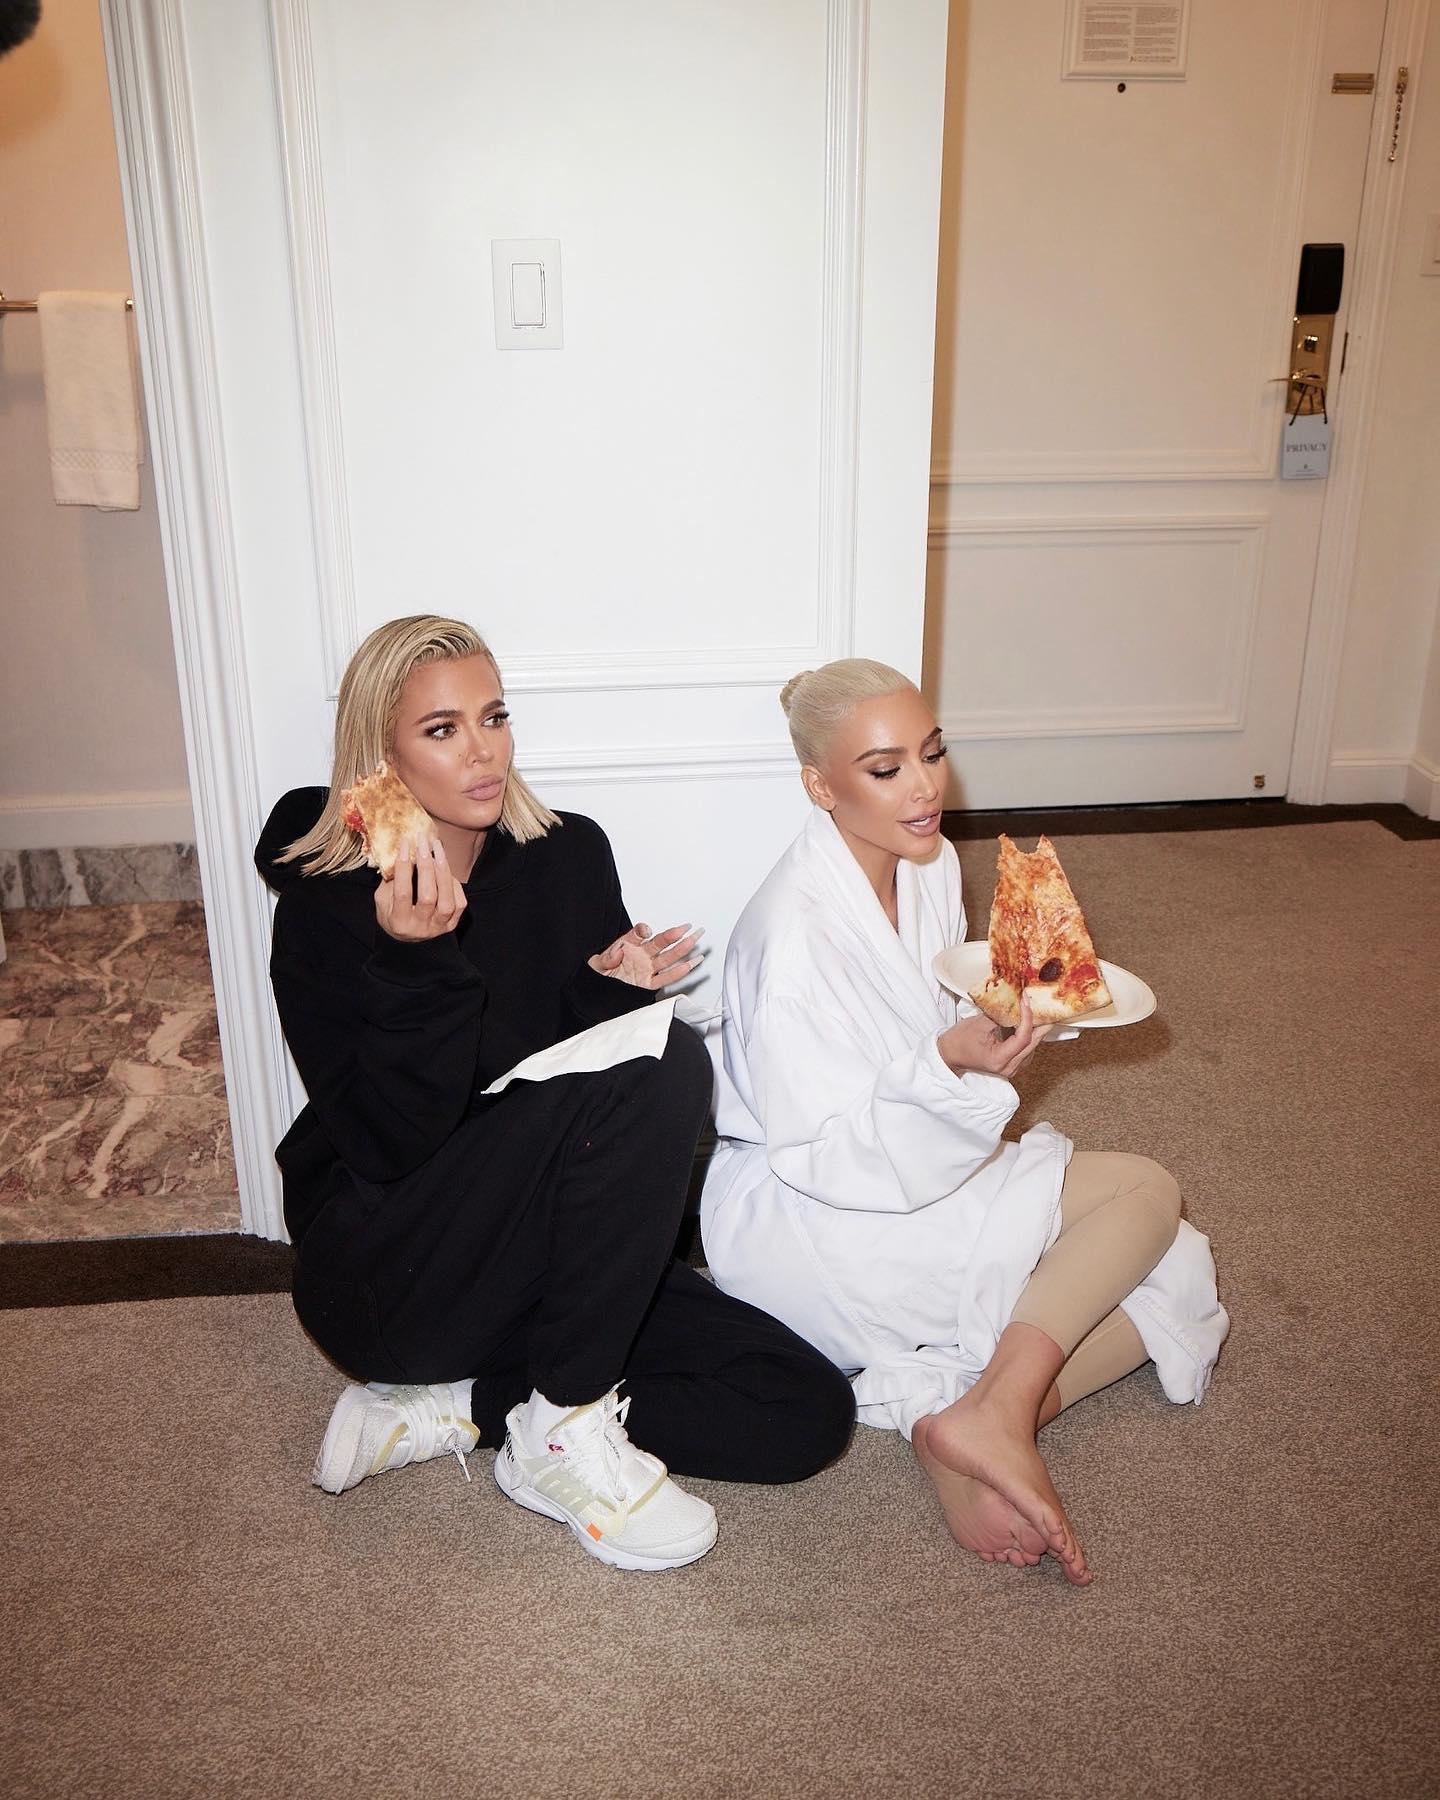 Kim and eating pizza